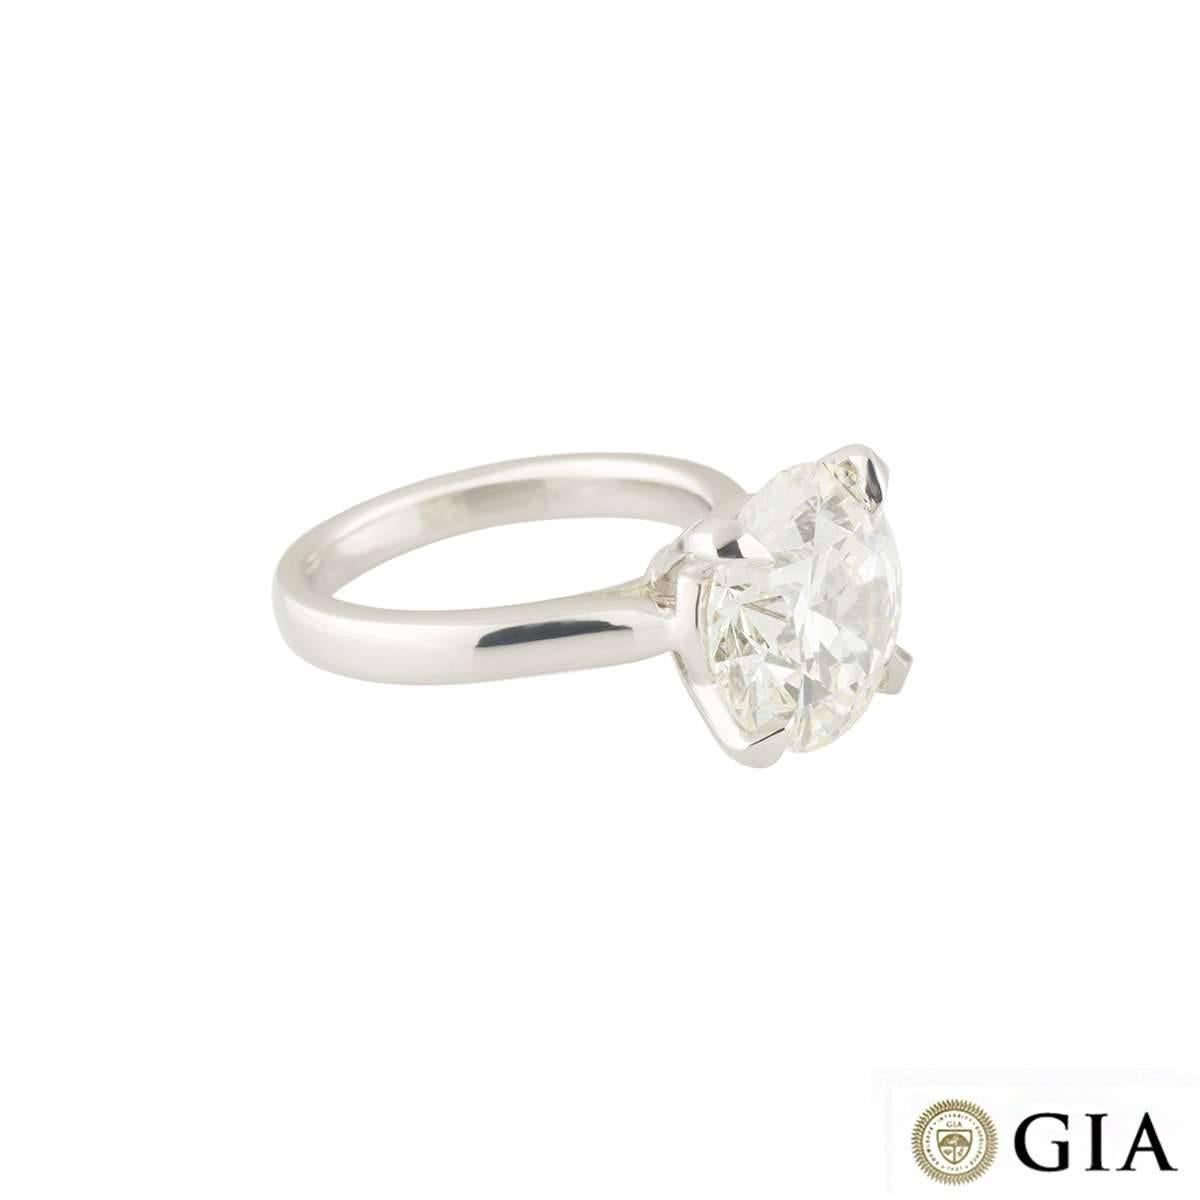 Round Cut GIA Certified 5.46 Carat Round Brilliant Cut Diamond Engagement Ring For Sale